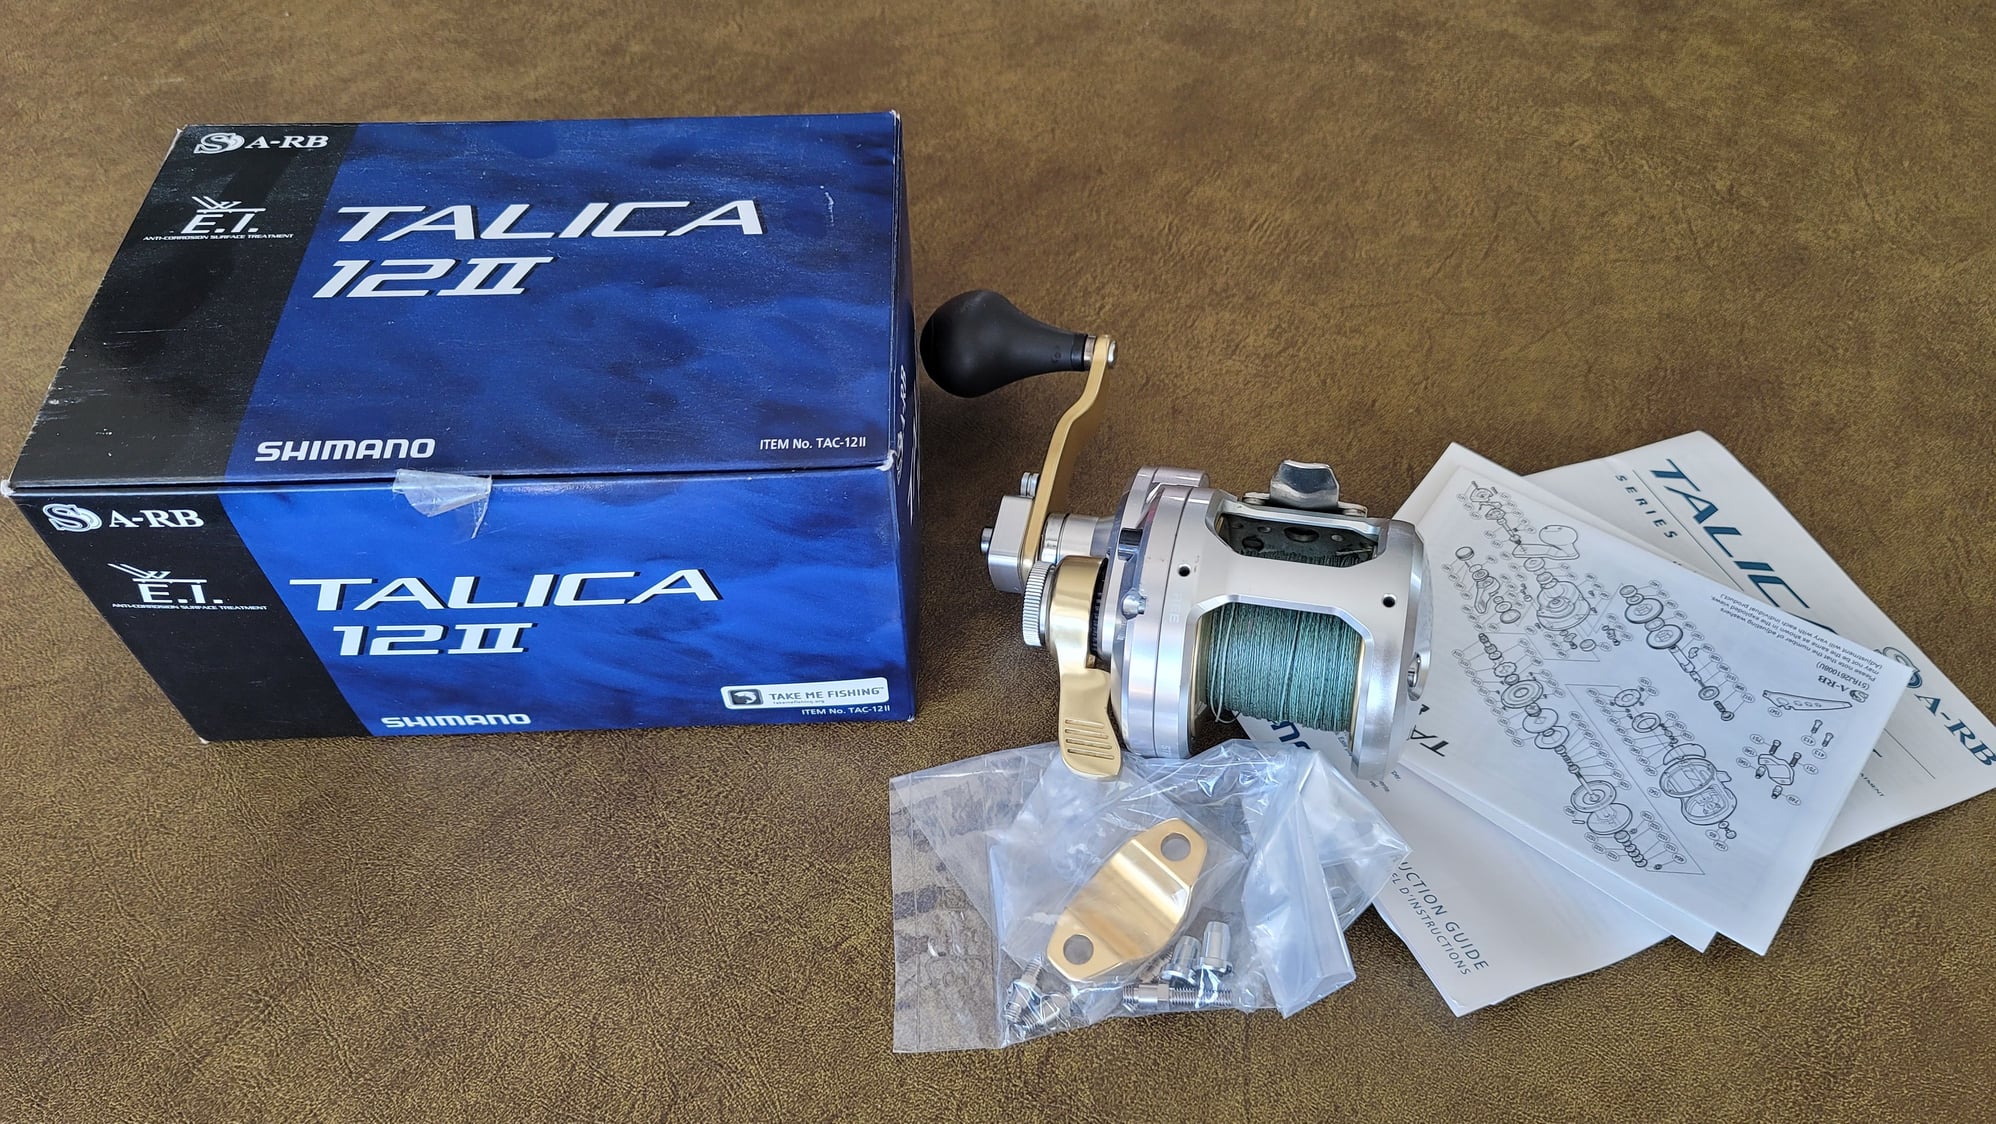 Shimano Talica 12 2 speed for sale - The Hull Truth - Boating and